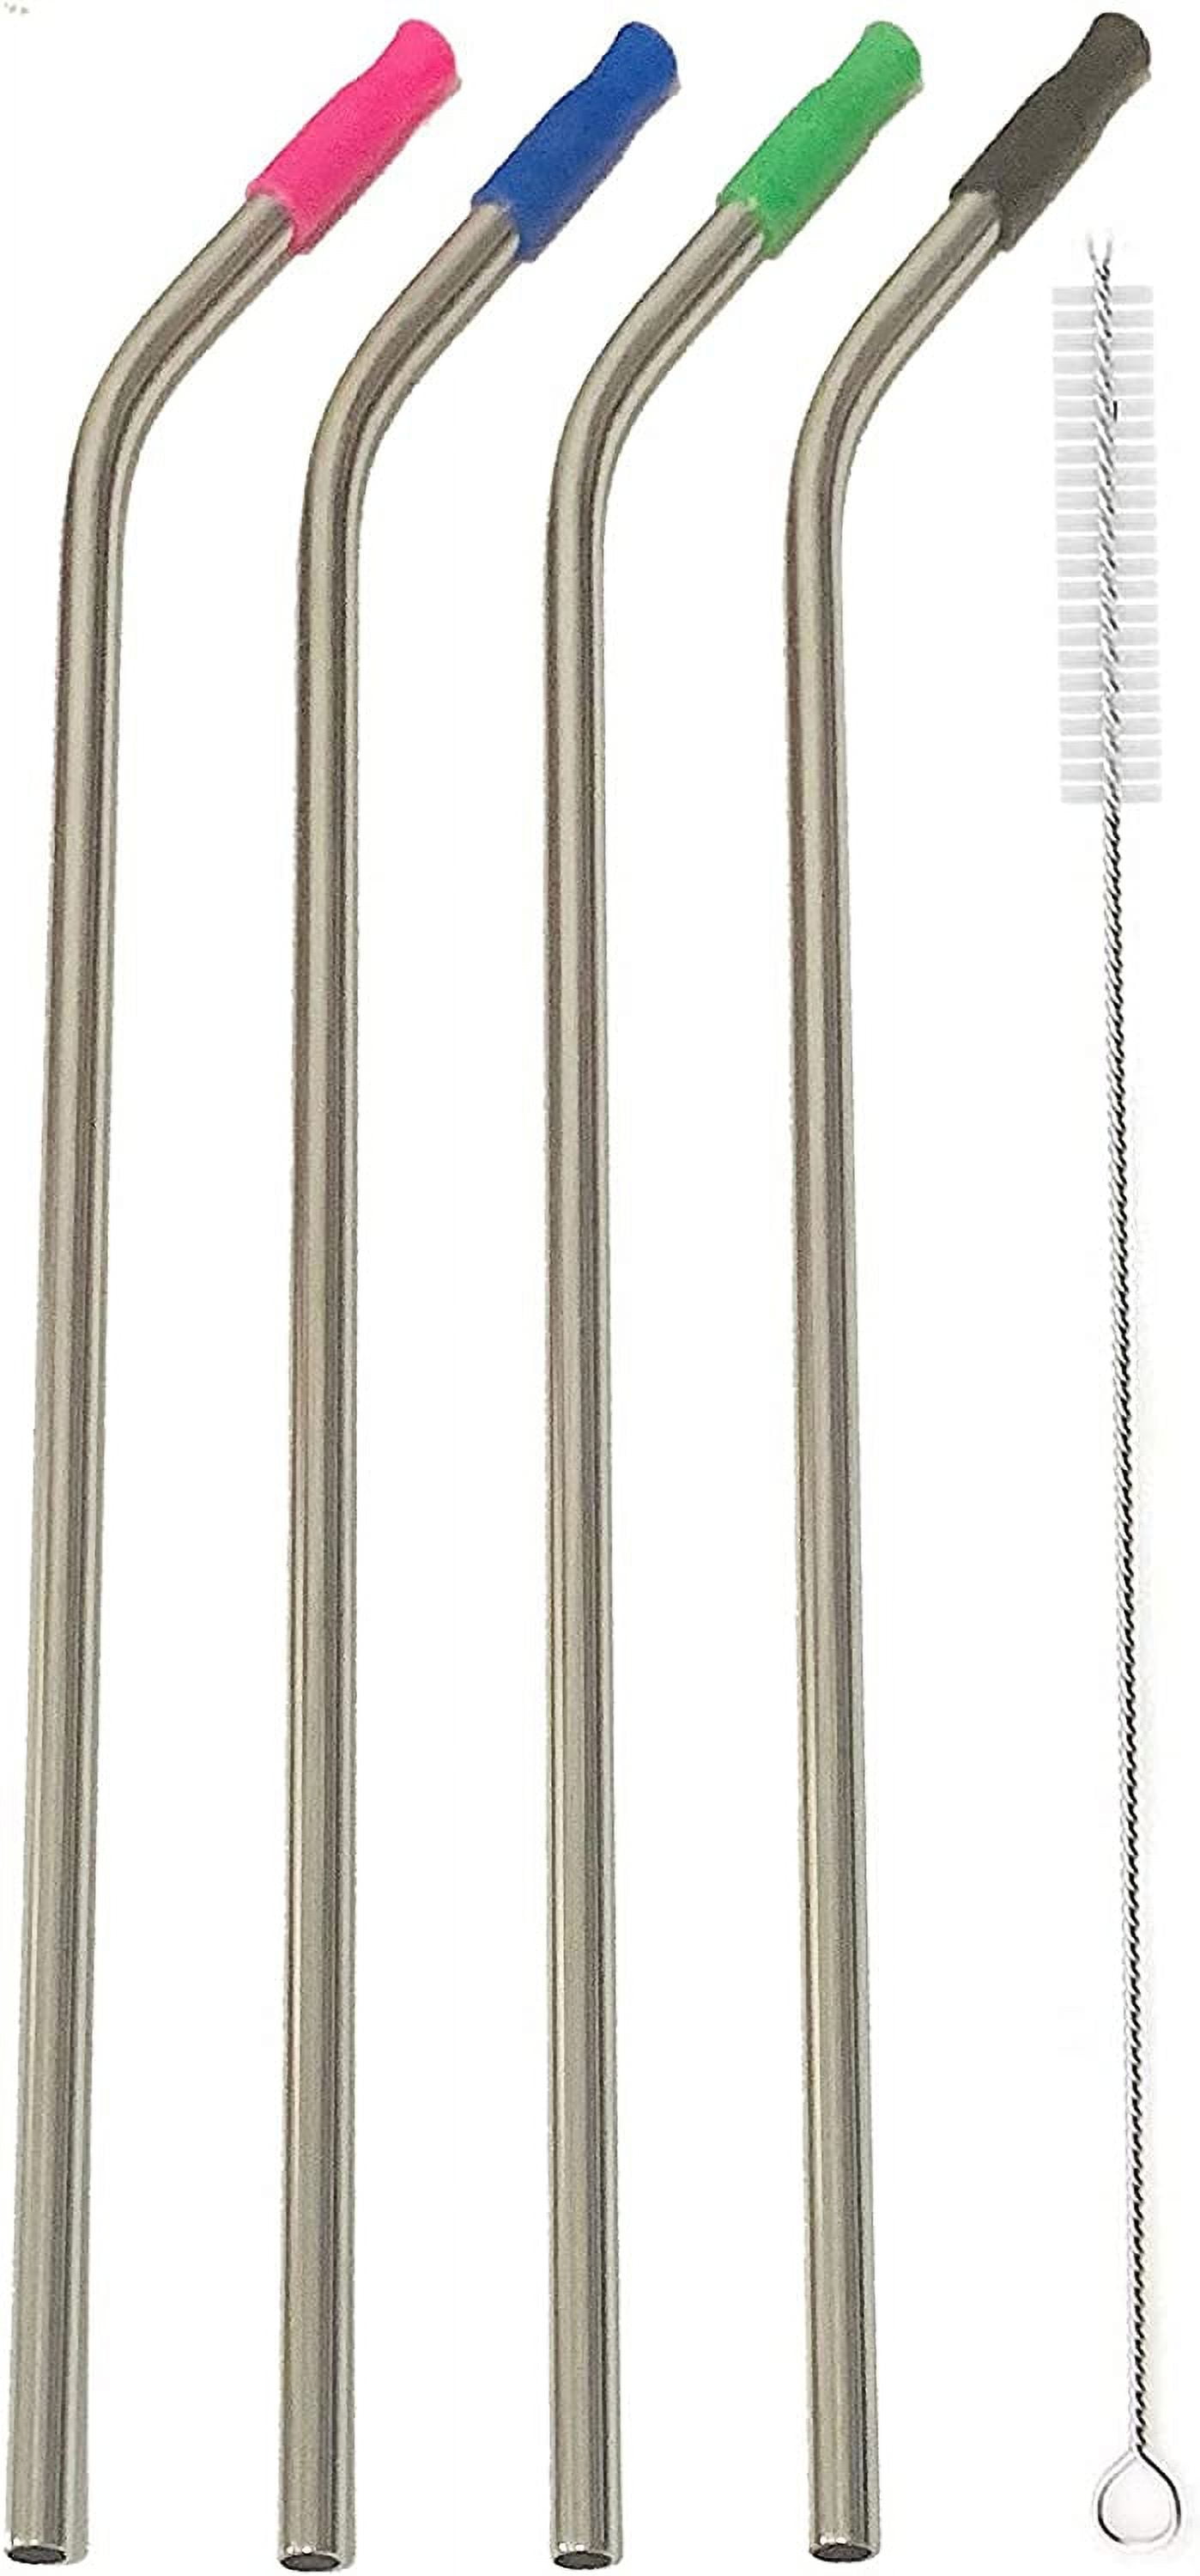 Wobye 4 Pieces 14 Extra Long 0.32 Big Wide Reusable Stainless Steel Metal  Straws with Cleaning Brush & Silicone Tip for 128 100 75 64 40 oz Large